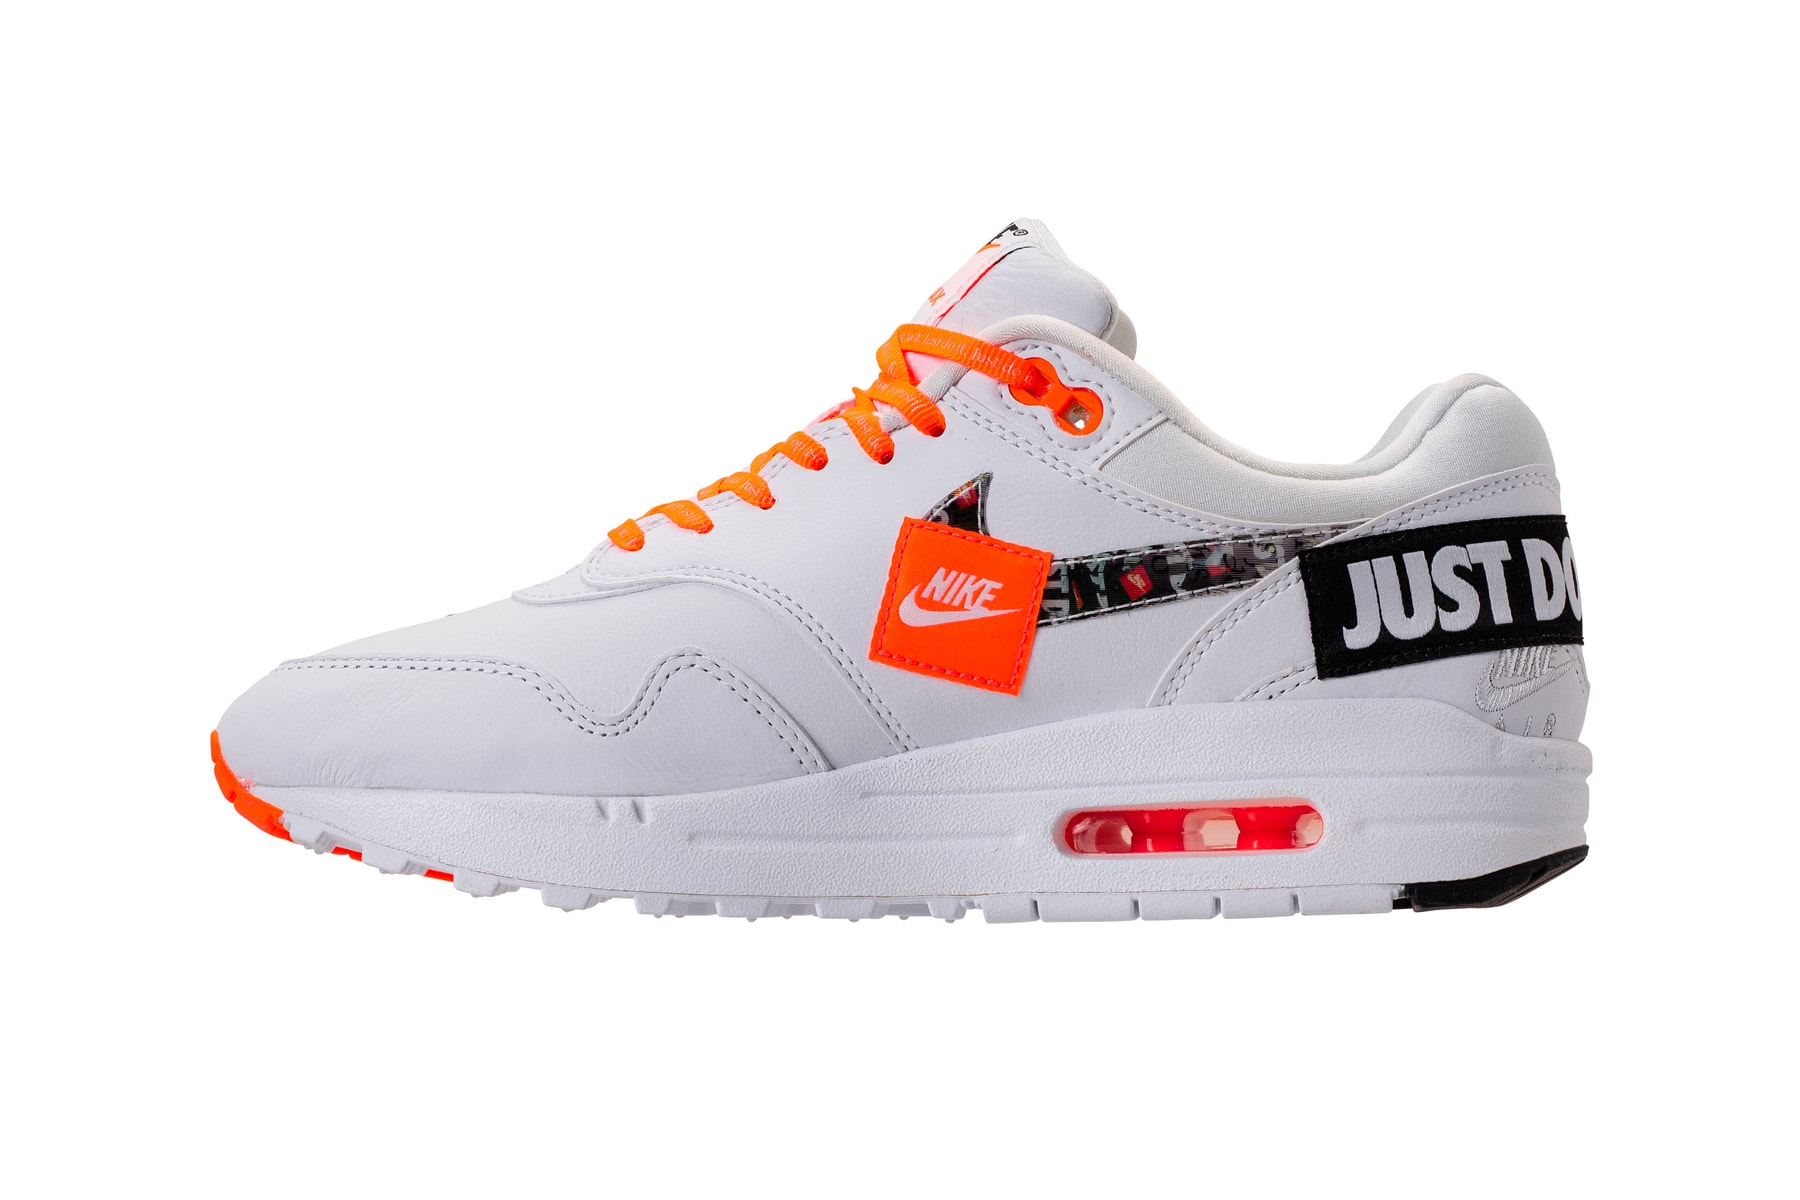 Nike Air Max 1 "Just Do It" white